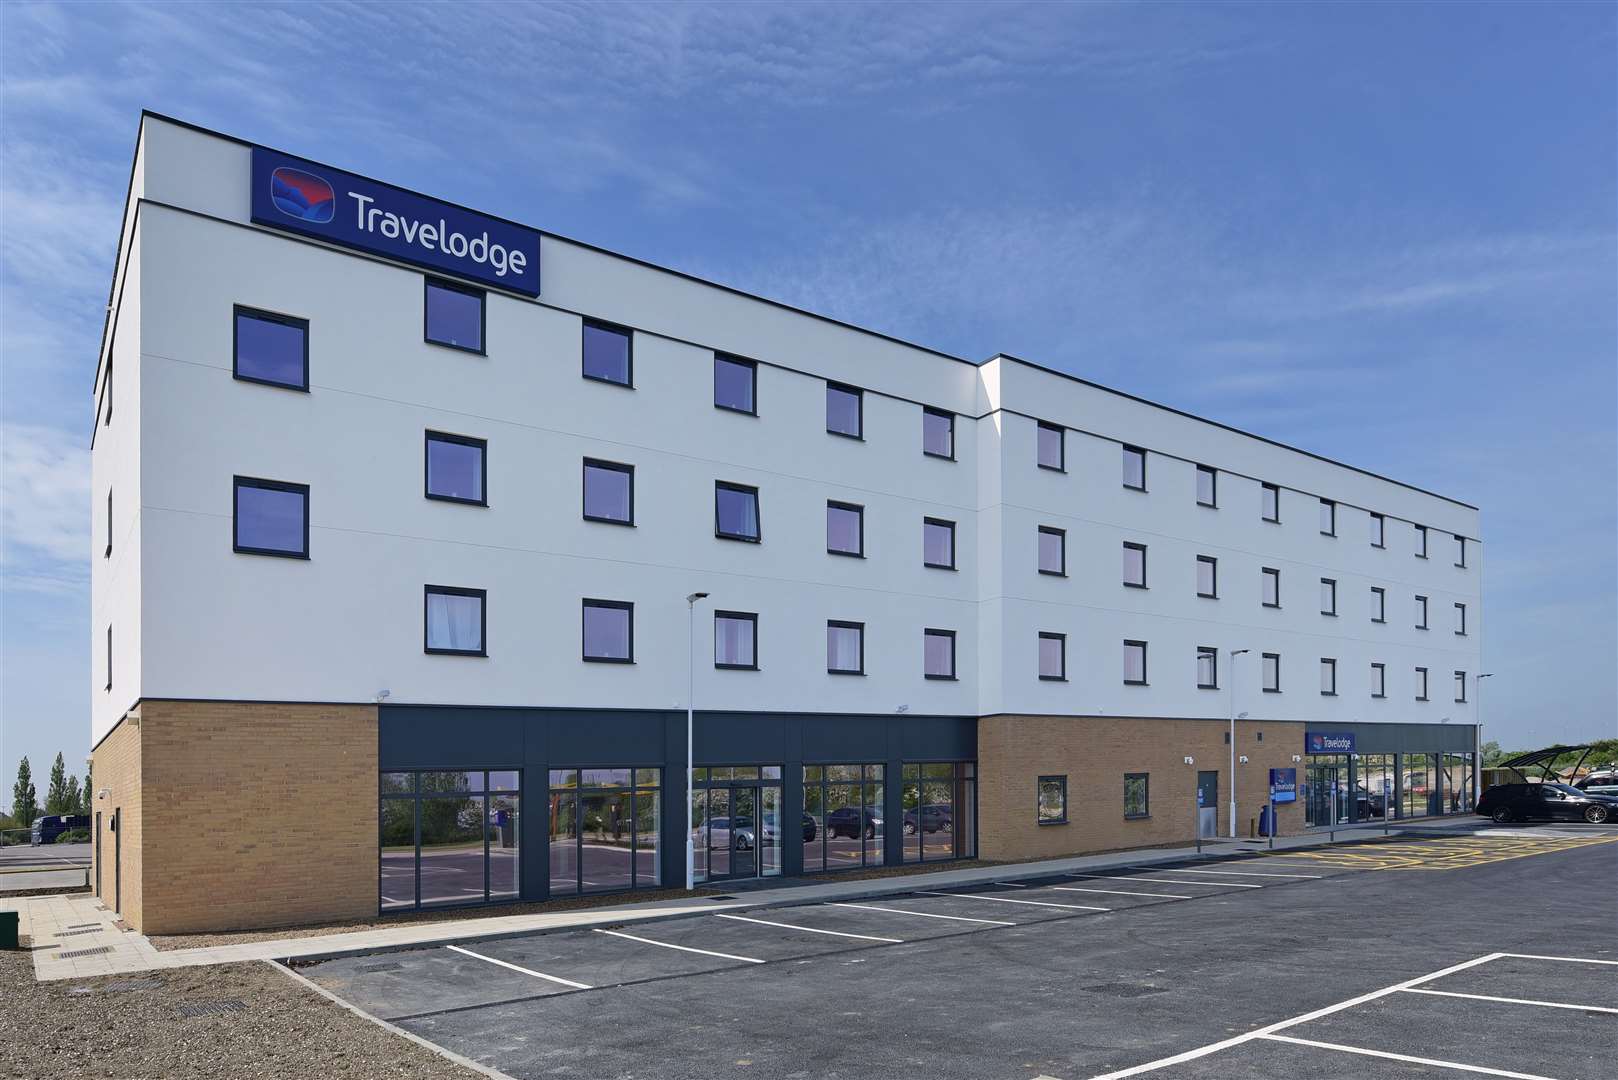 A Tesla that ran out of charge was left at a Travelodge hotel in Sandwich